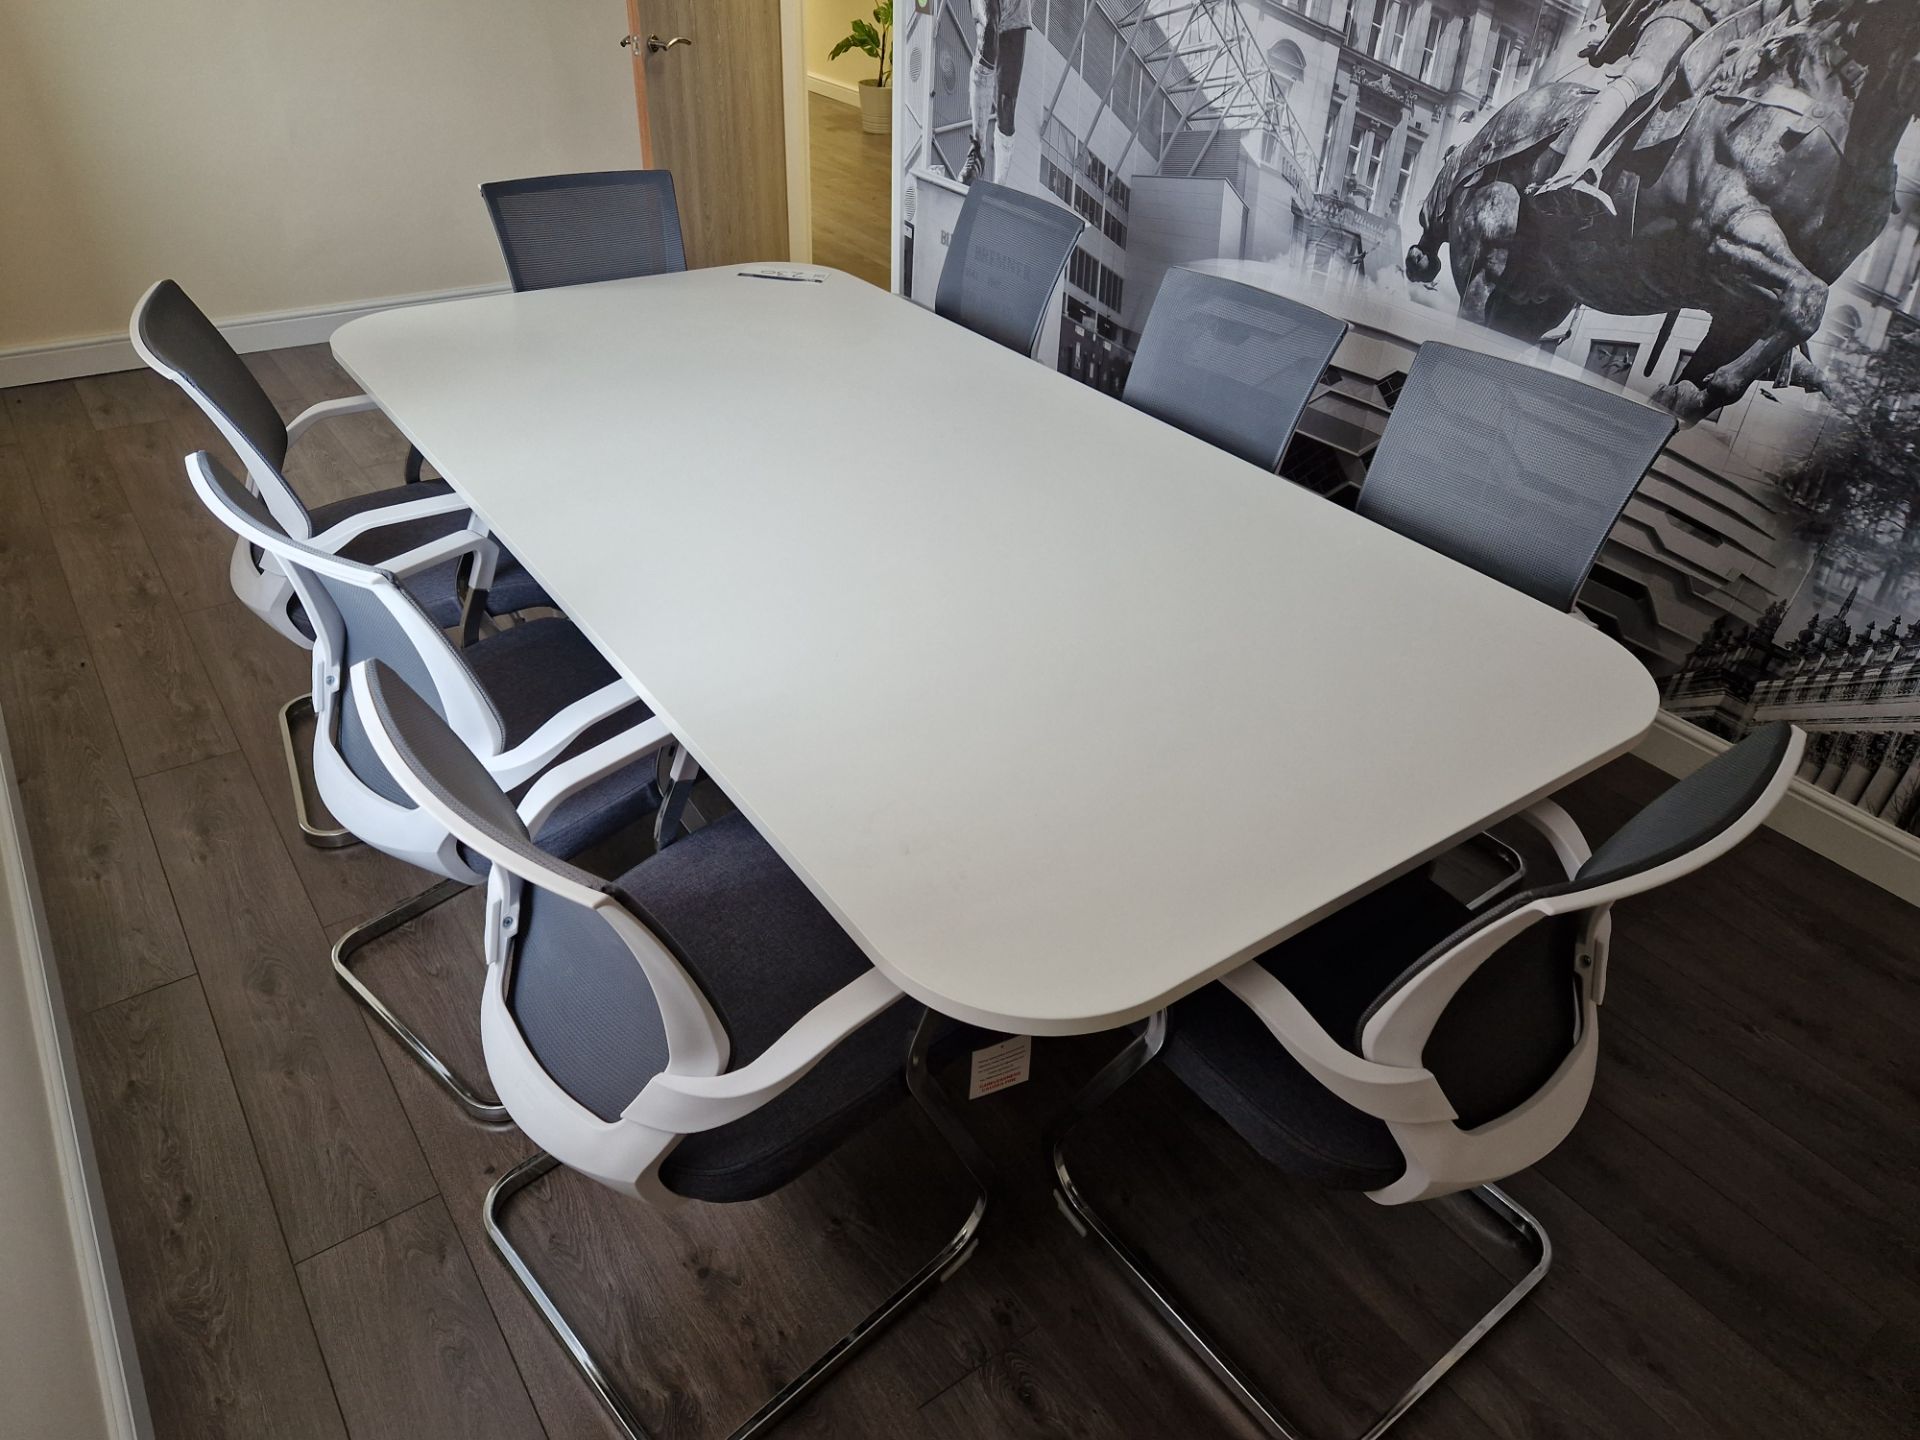 Rectangular Meeting Table , approx. 2.4m x 1.2m x 0.7m, with eight mesh back metal framed chairs - Image 3 of 3